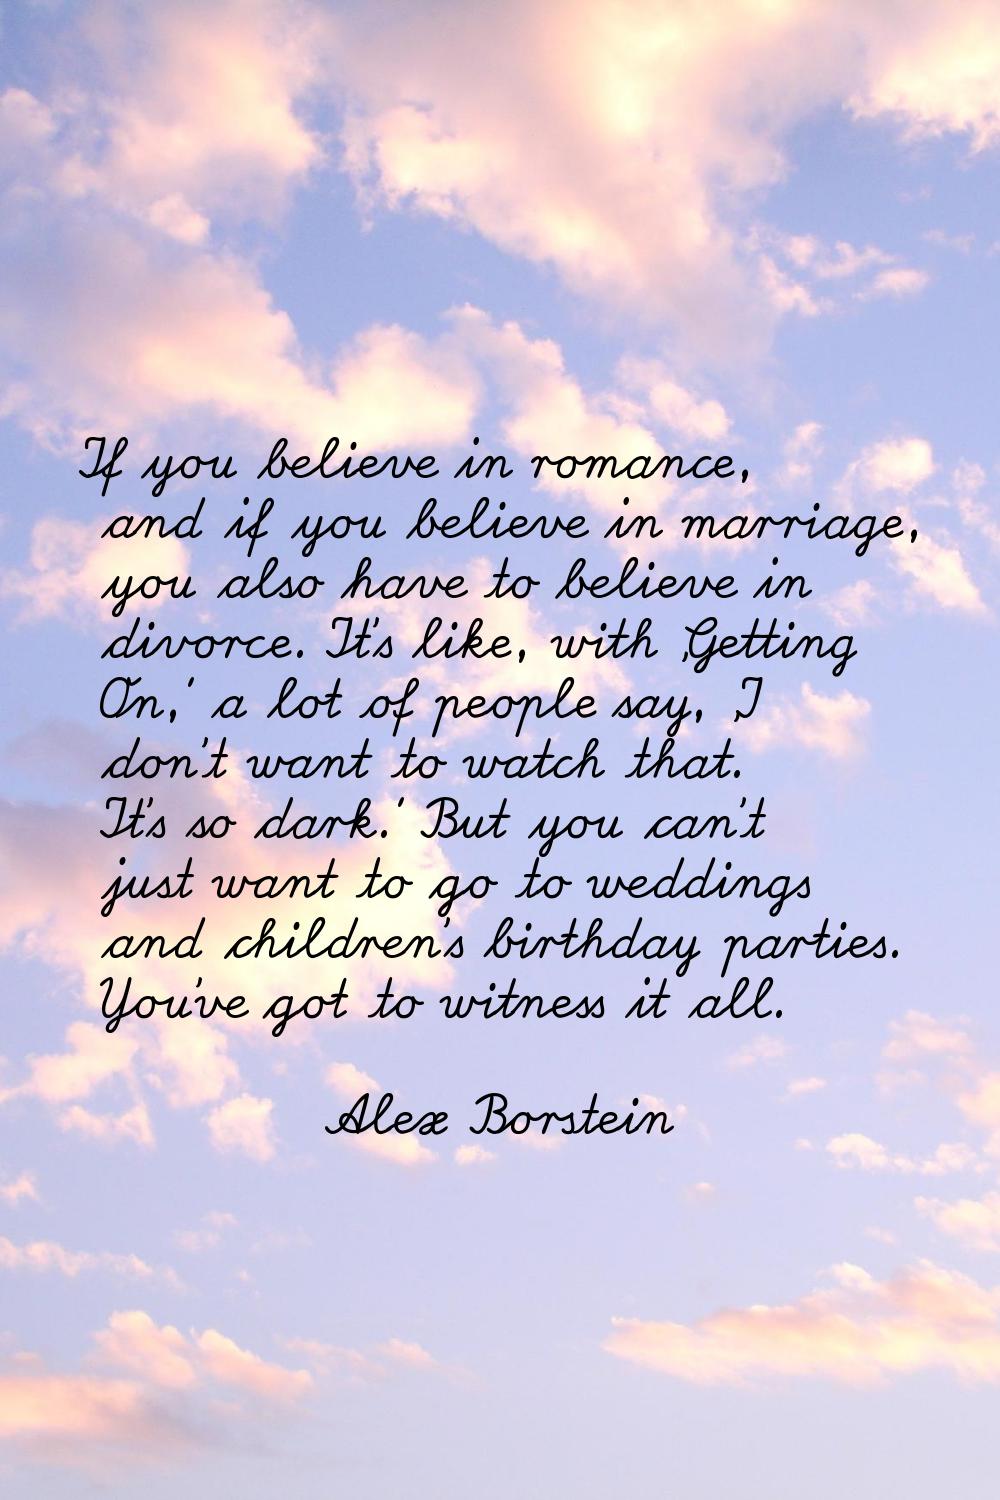 If you believe in romance, and if you believe in marriage, you also have to believe in divorce. It'